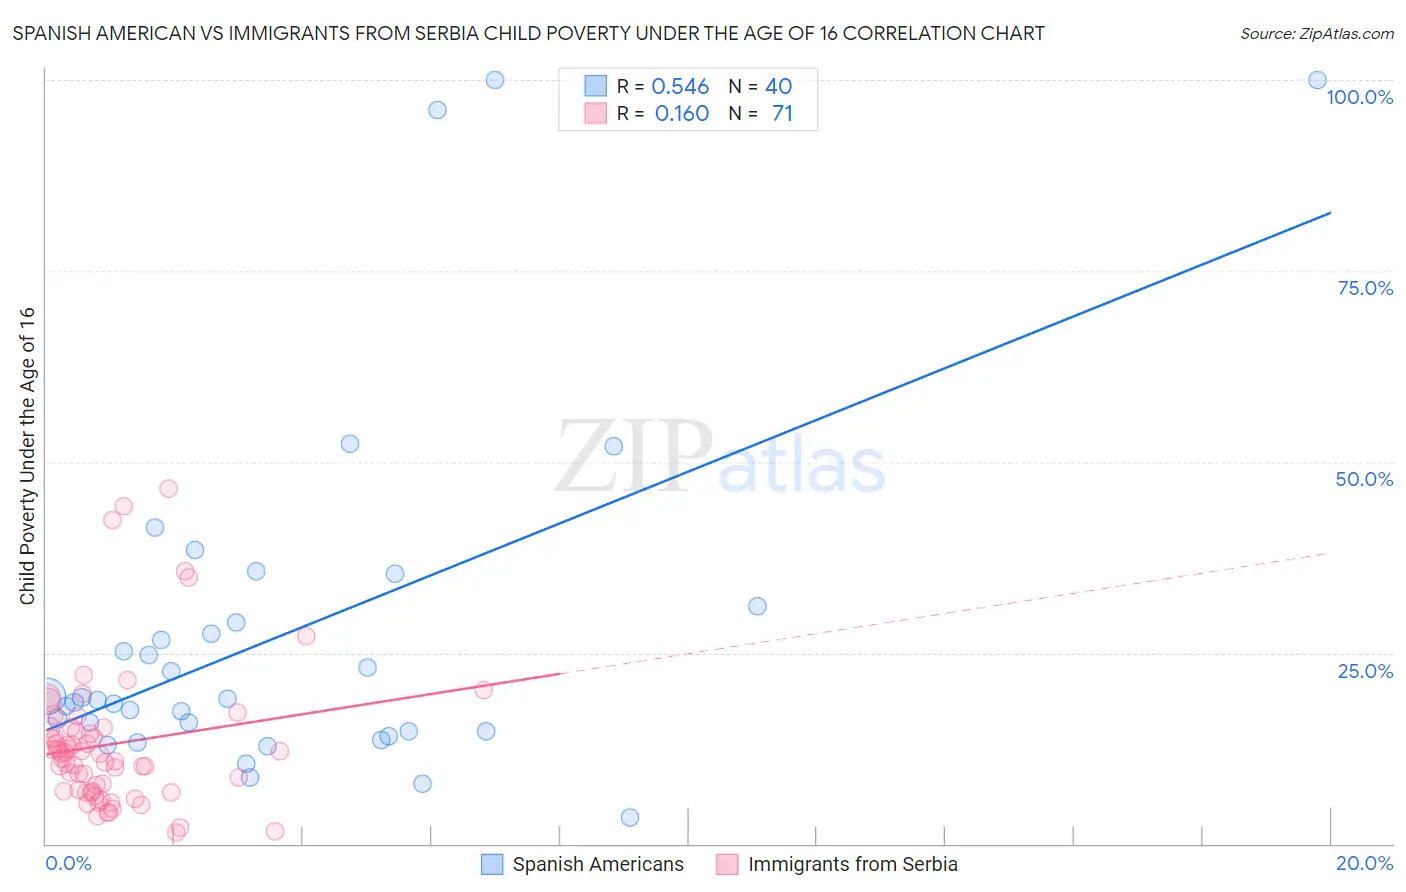 Spanish American vs Immigrants from Serbia Child Poverty Under the Age of 16